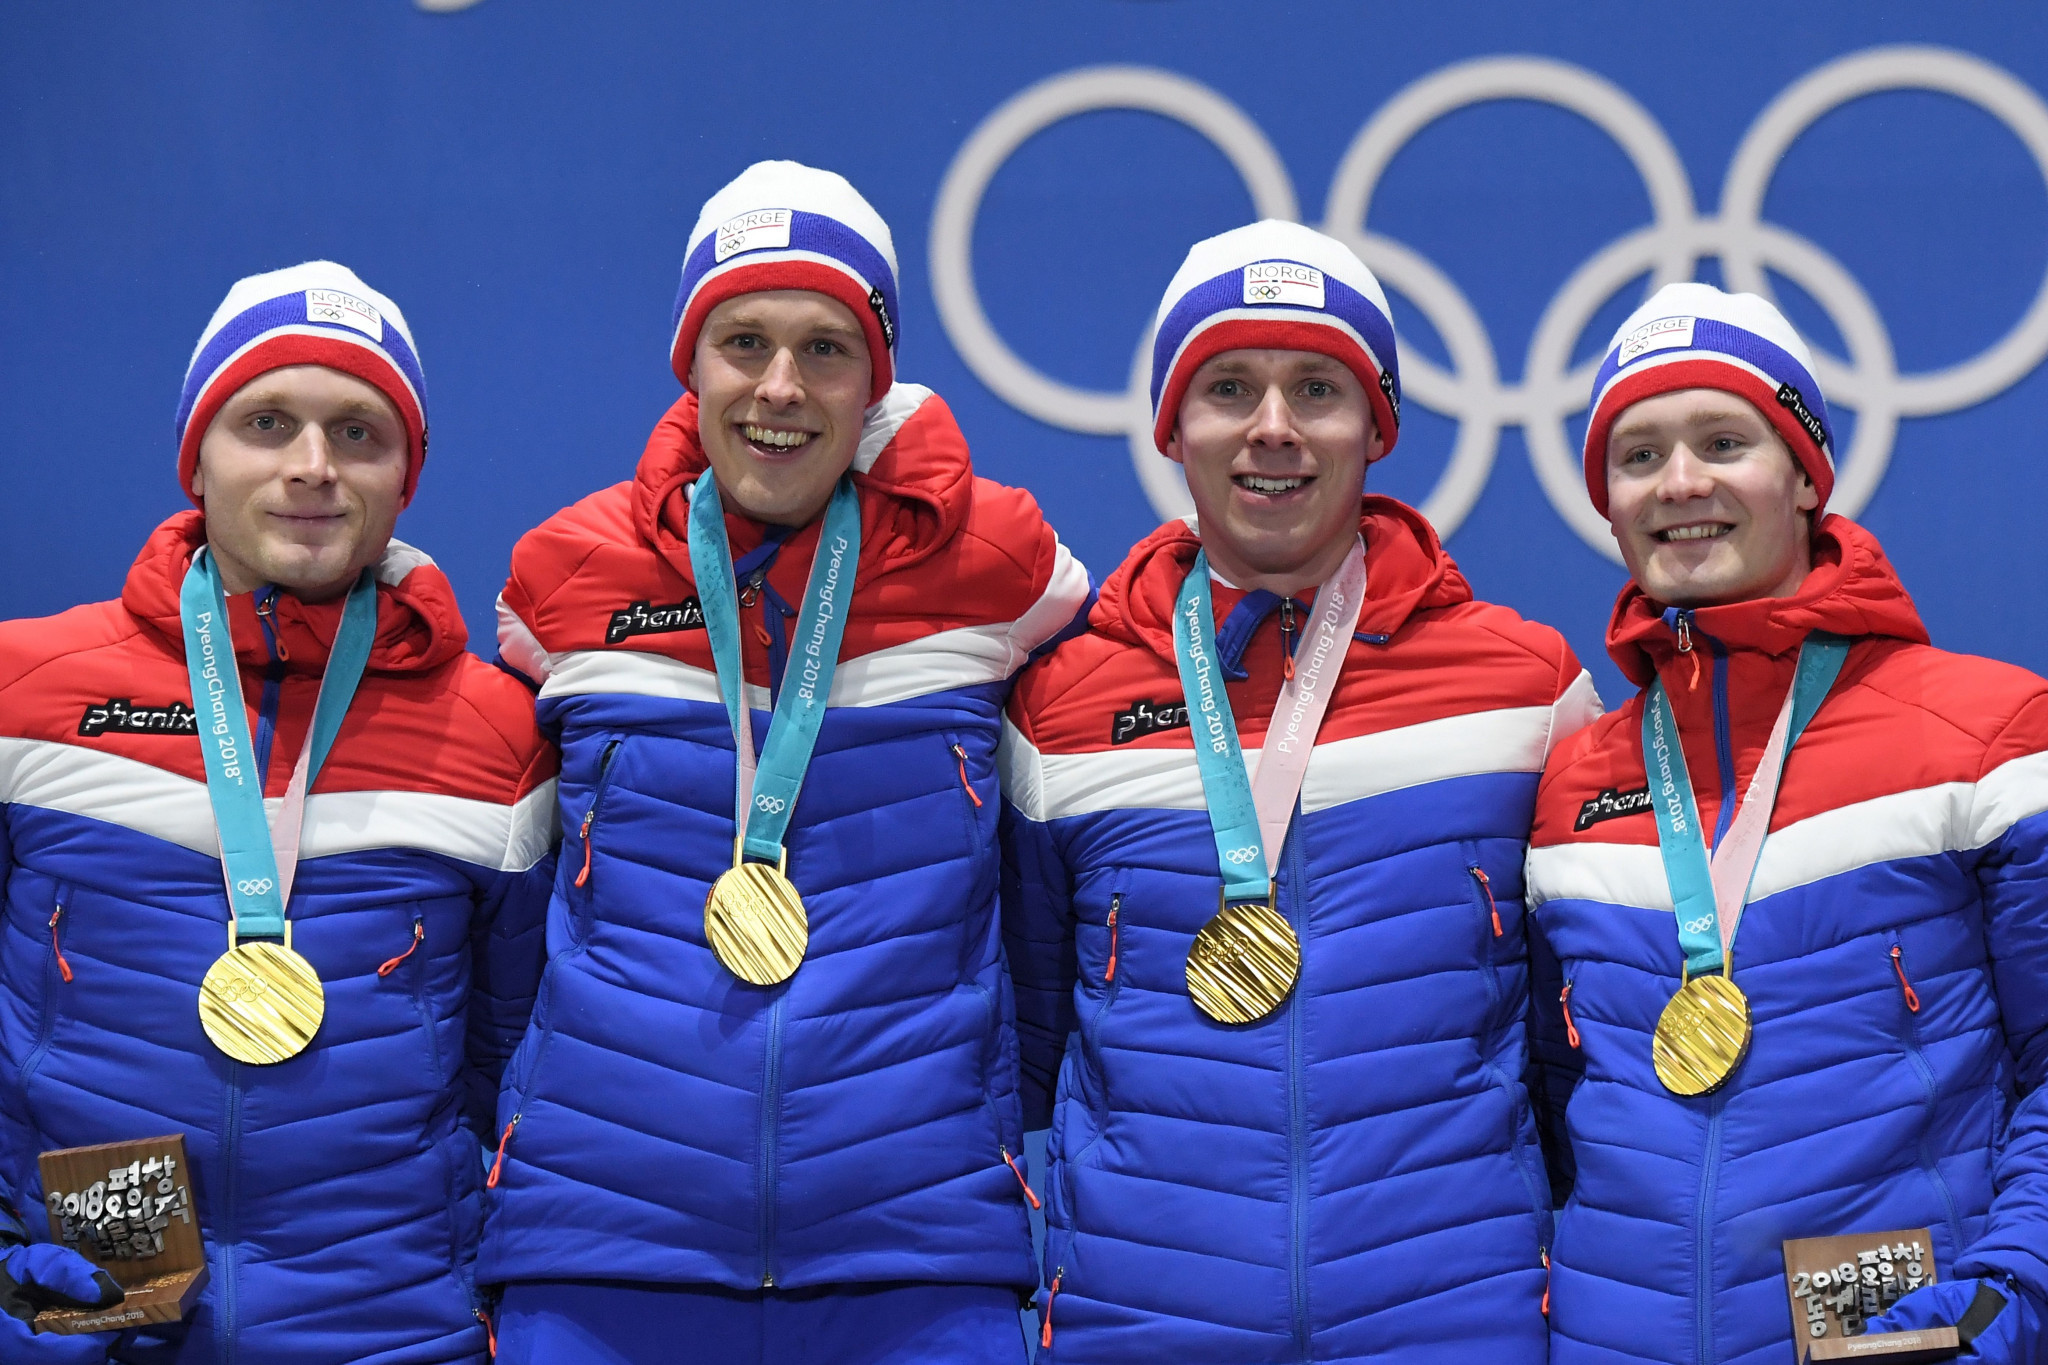 Sverre Lunde Pedersen was part of Norway’s victorious team pursuit squad at Pyeongchang 2018 ©Getty Images